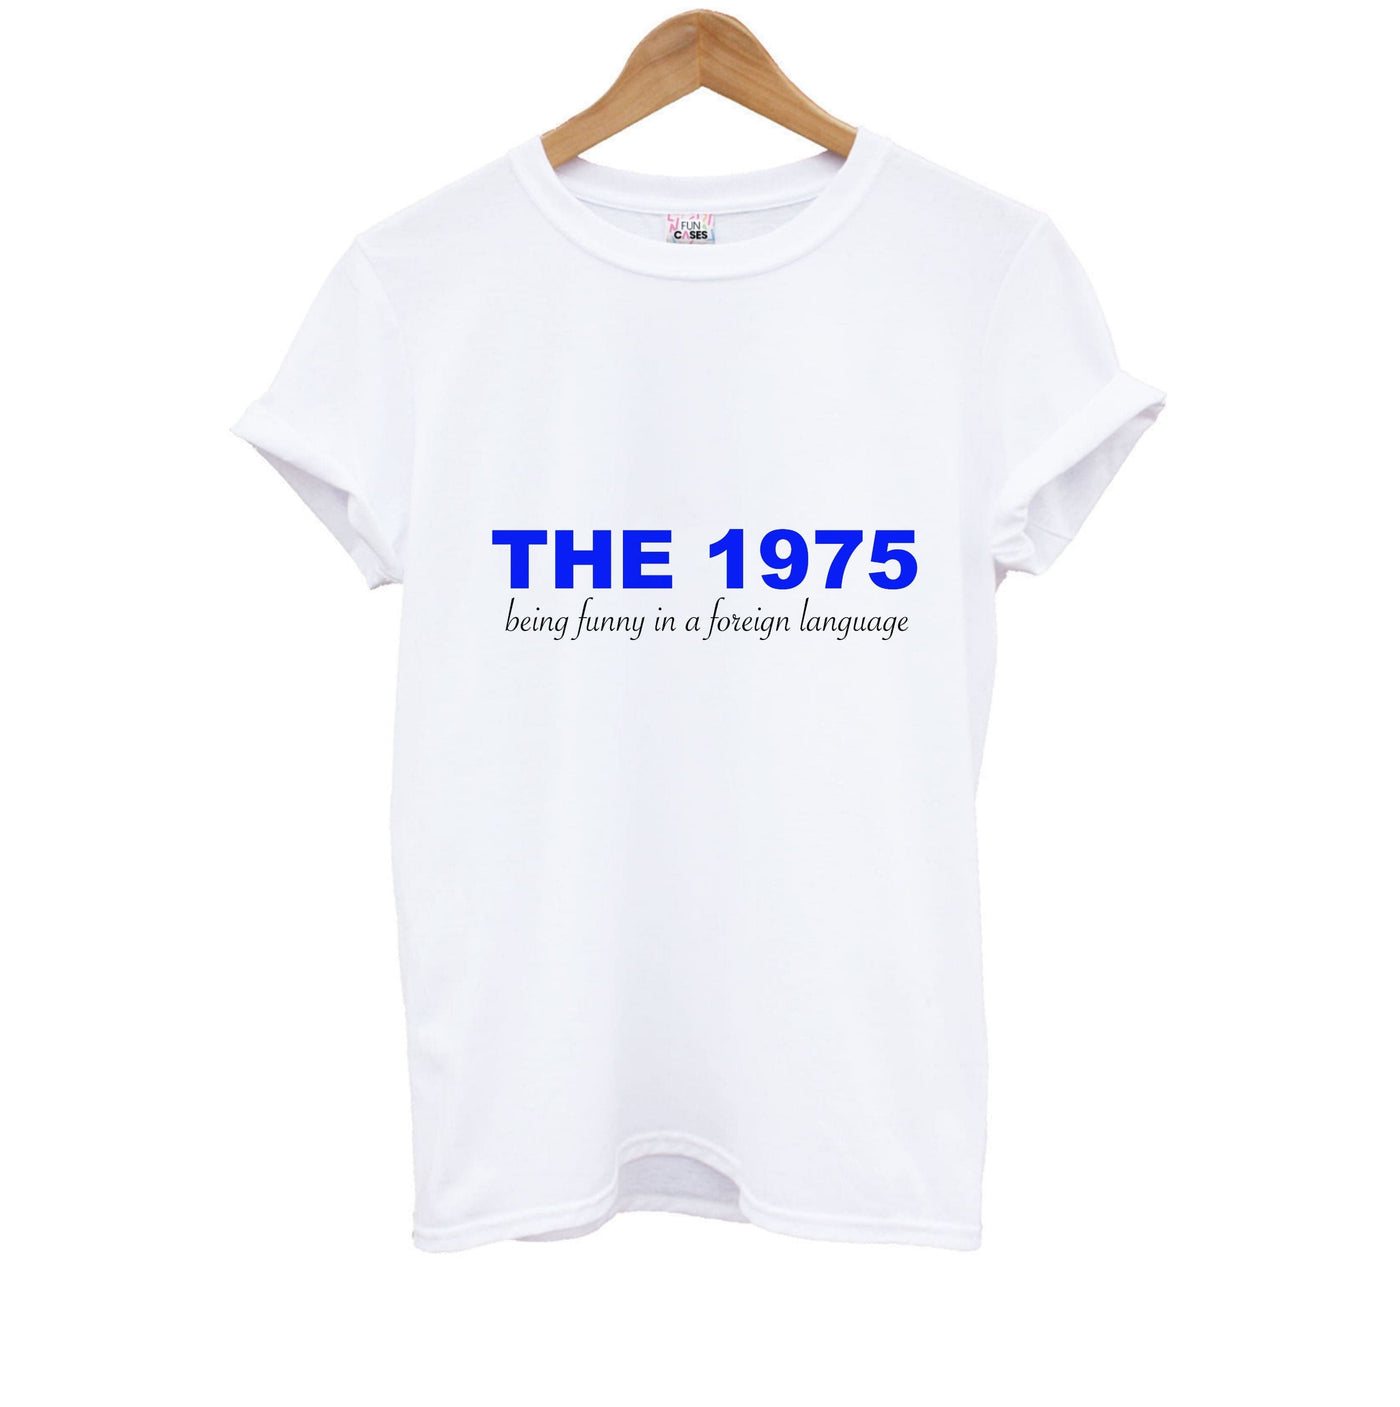 Being Funny - The 1975 Kids T-Shirt